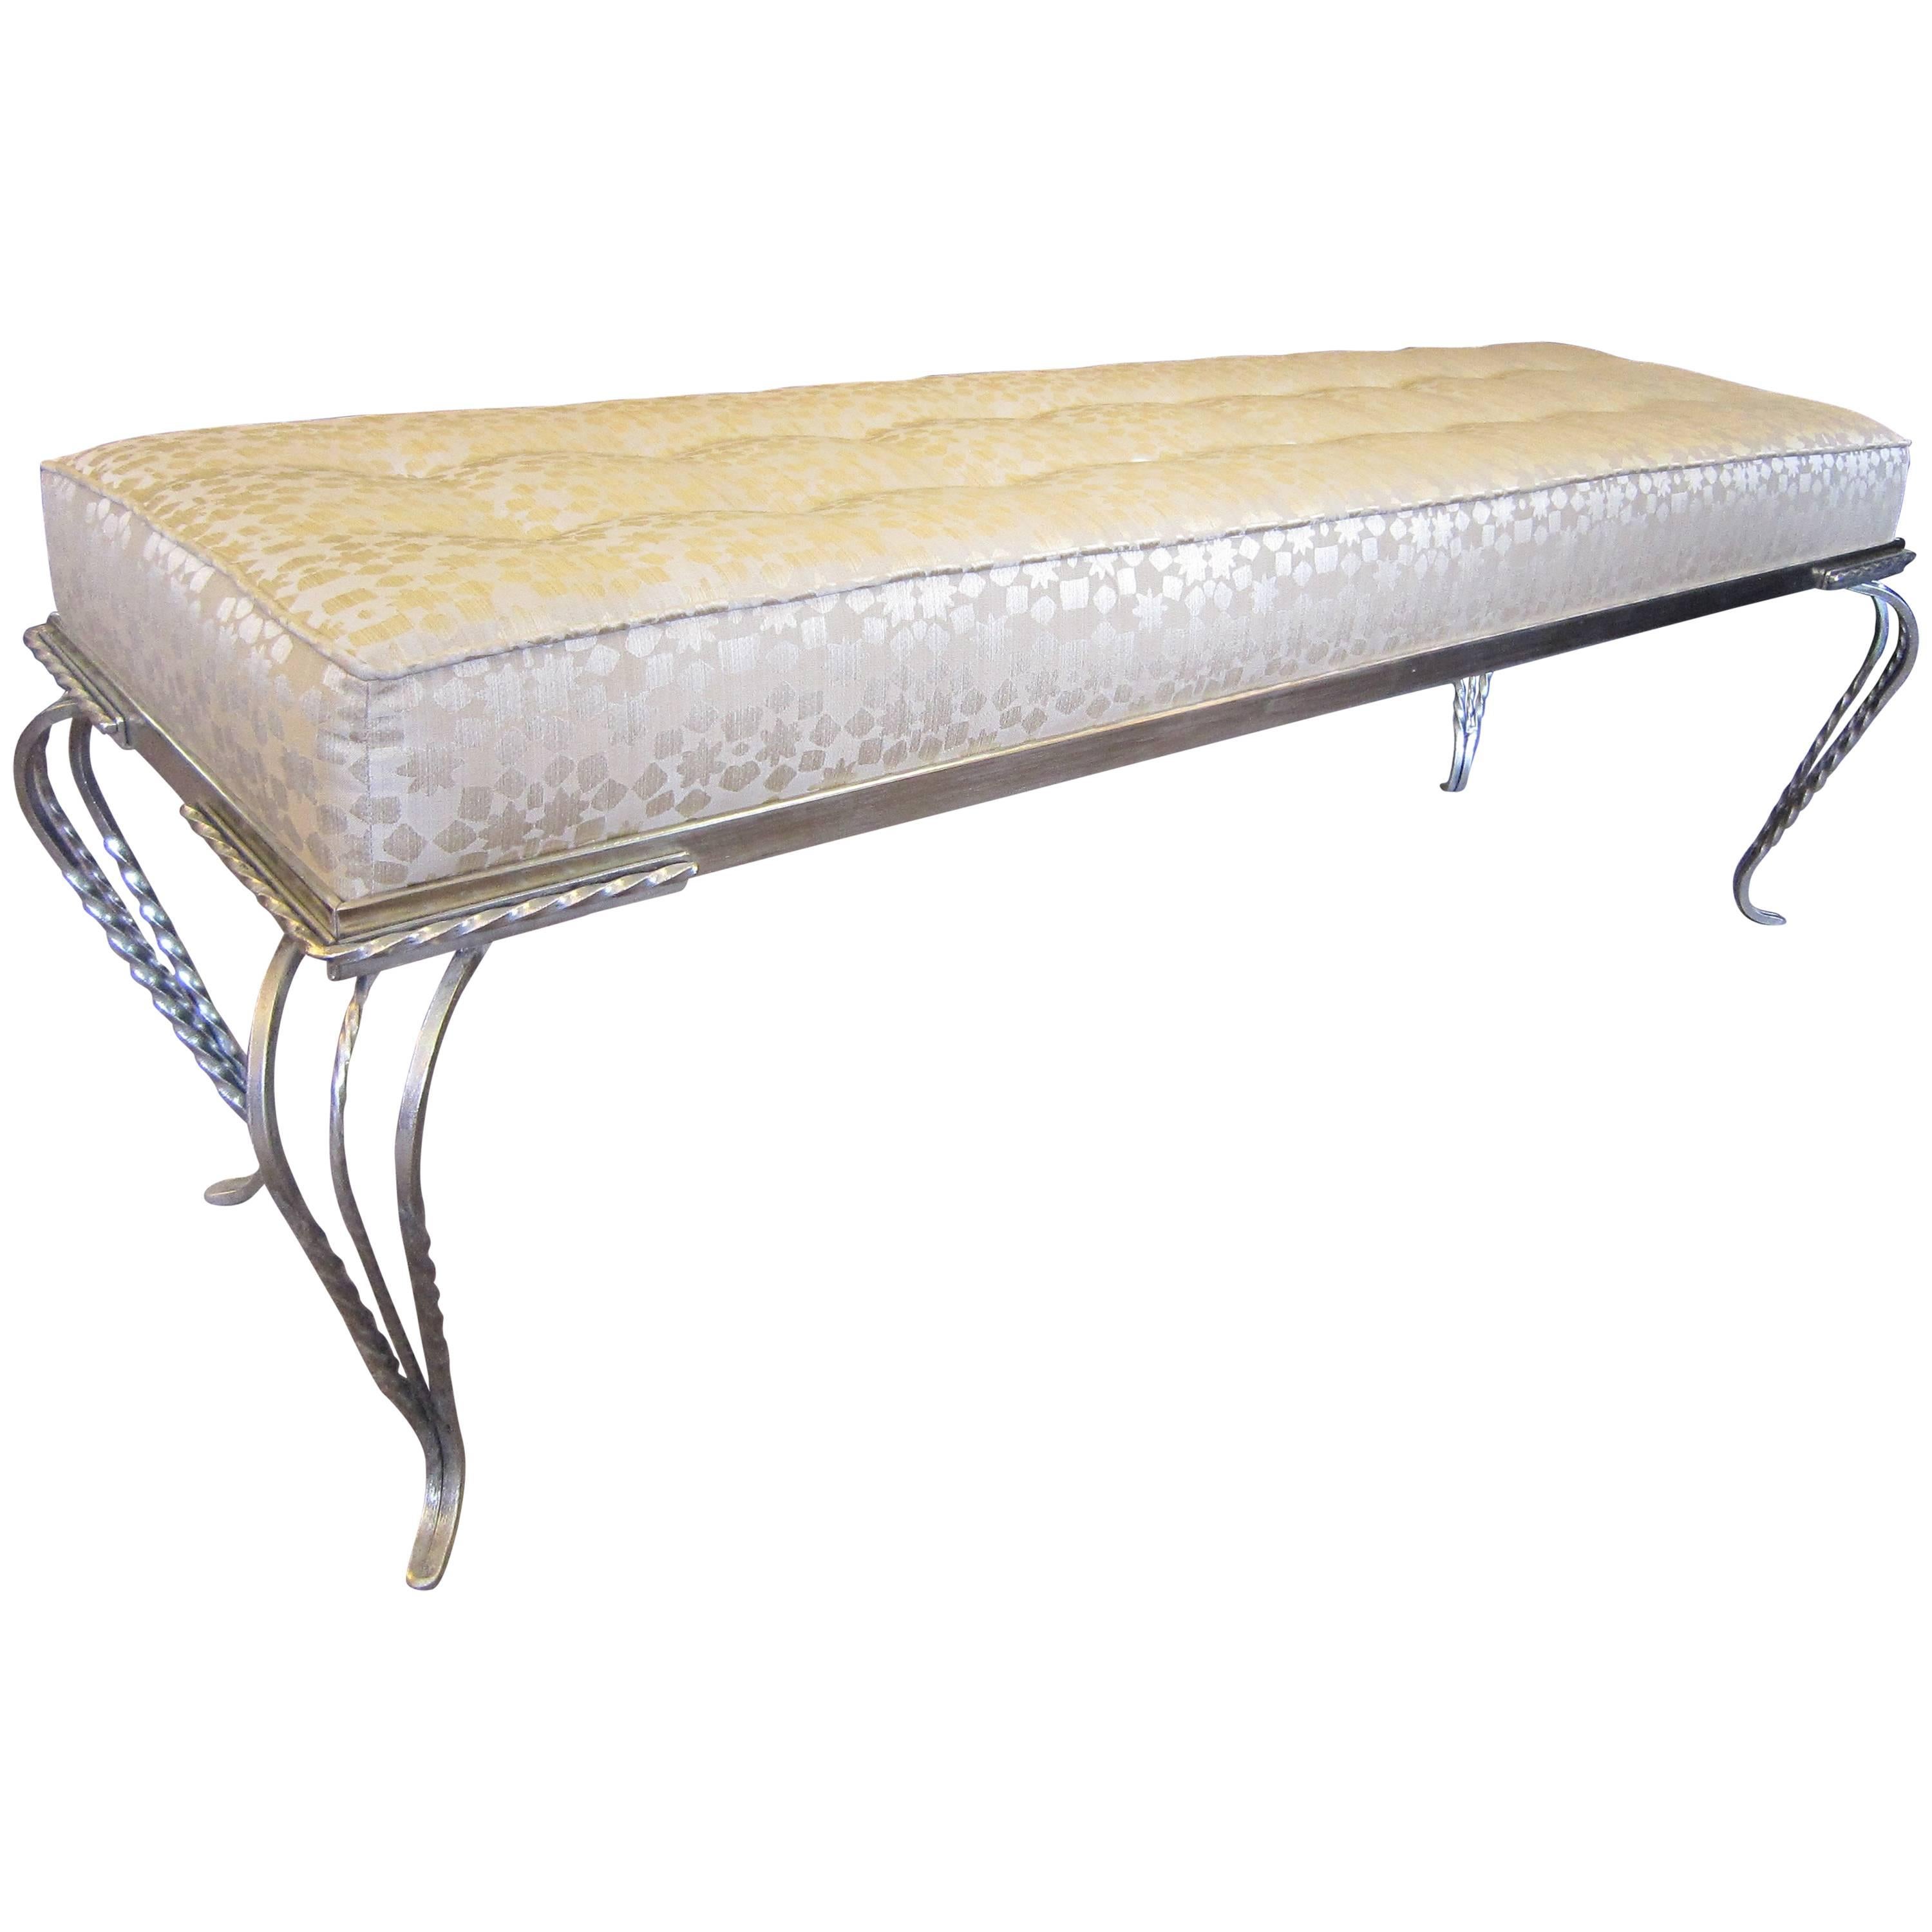 Long French Art Deco hammered iron upholstered sitting bench, Georges Vinant